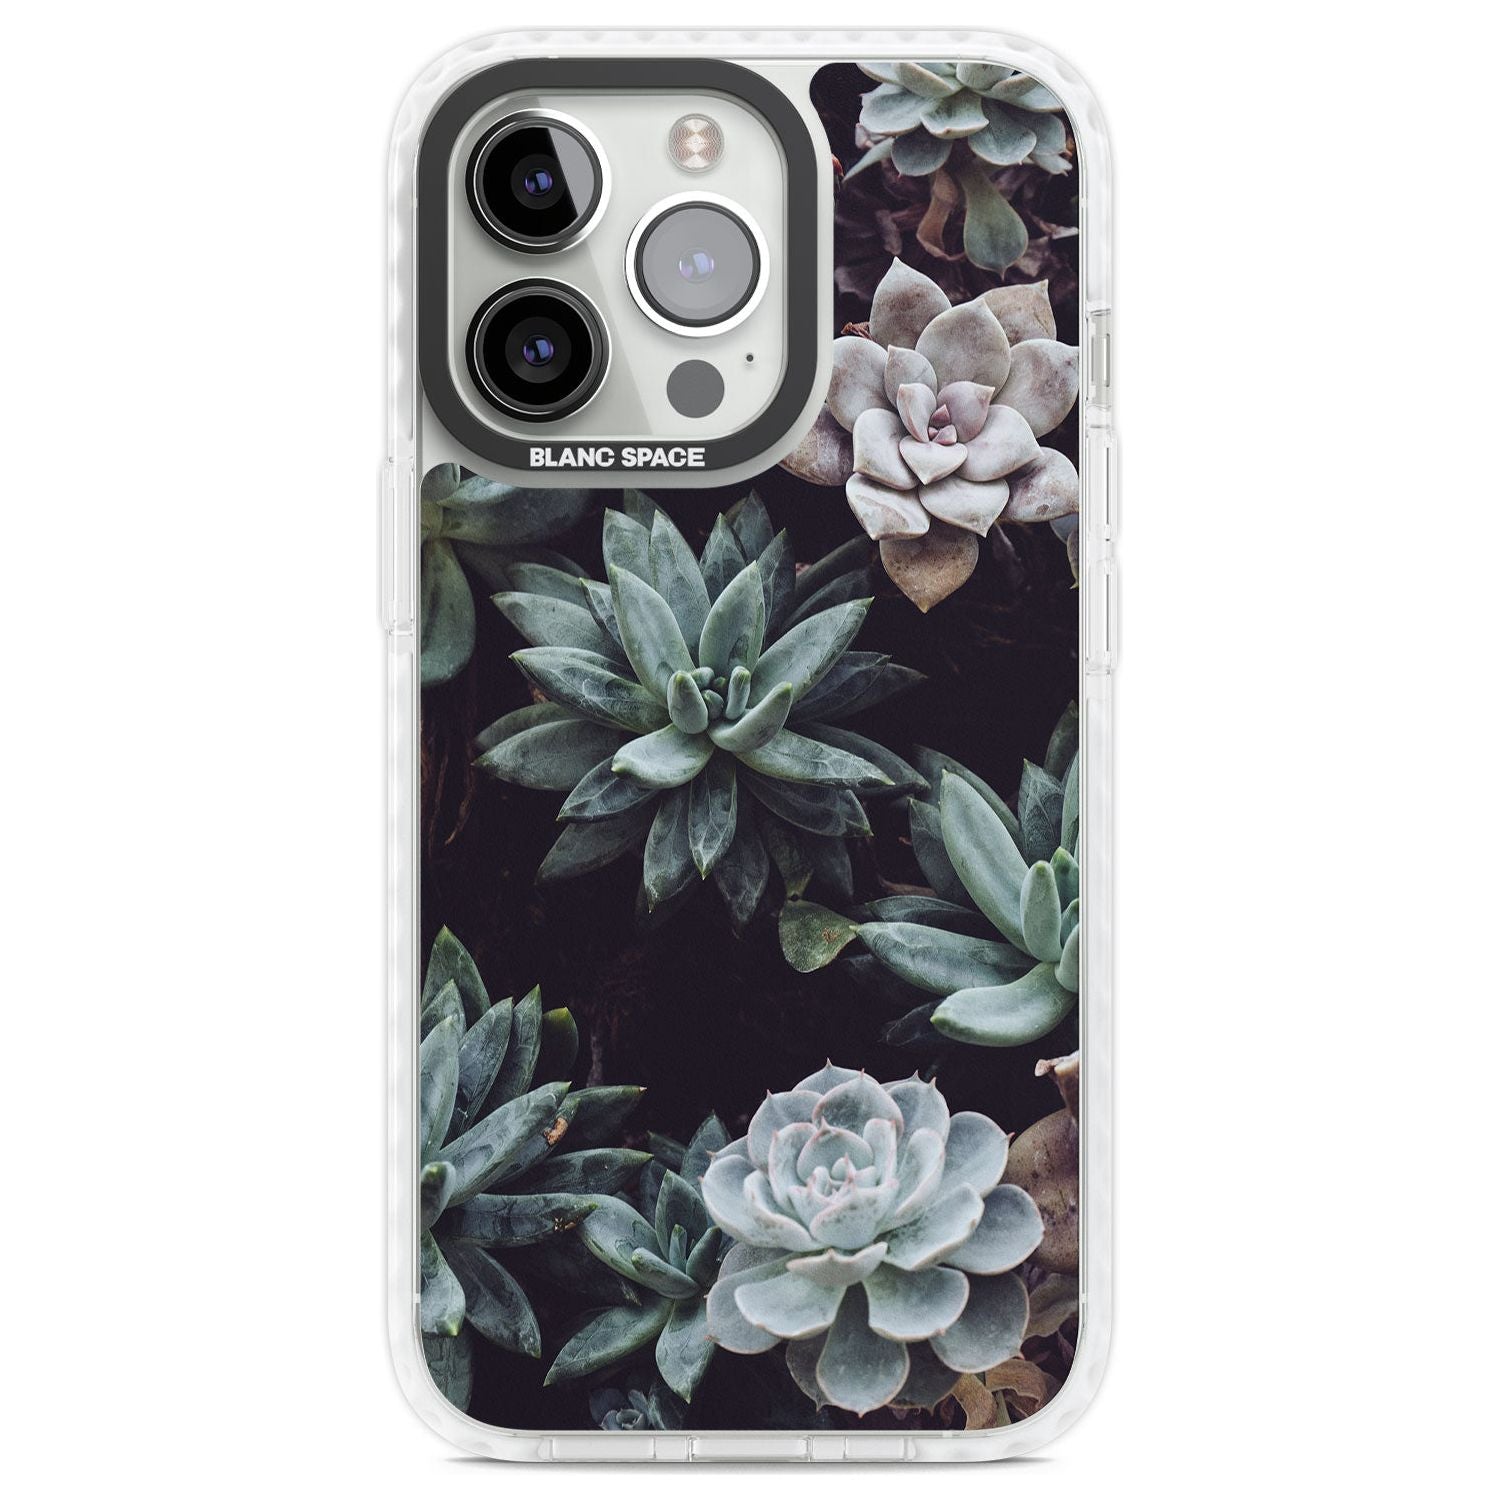 Mixed Succulents - Real Botanical Photographs Phone Case iPhone 13 Pro / Impact Case,iPhone 14 Pro / Impact Case,iPhone 15 Pro Max / Impact Case,iPhone 15 Pro / Impact Case Blanc Space